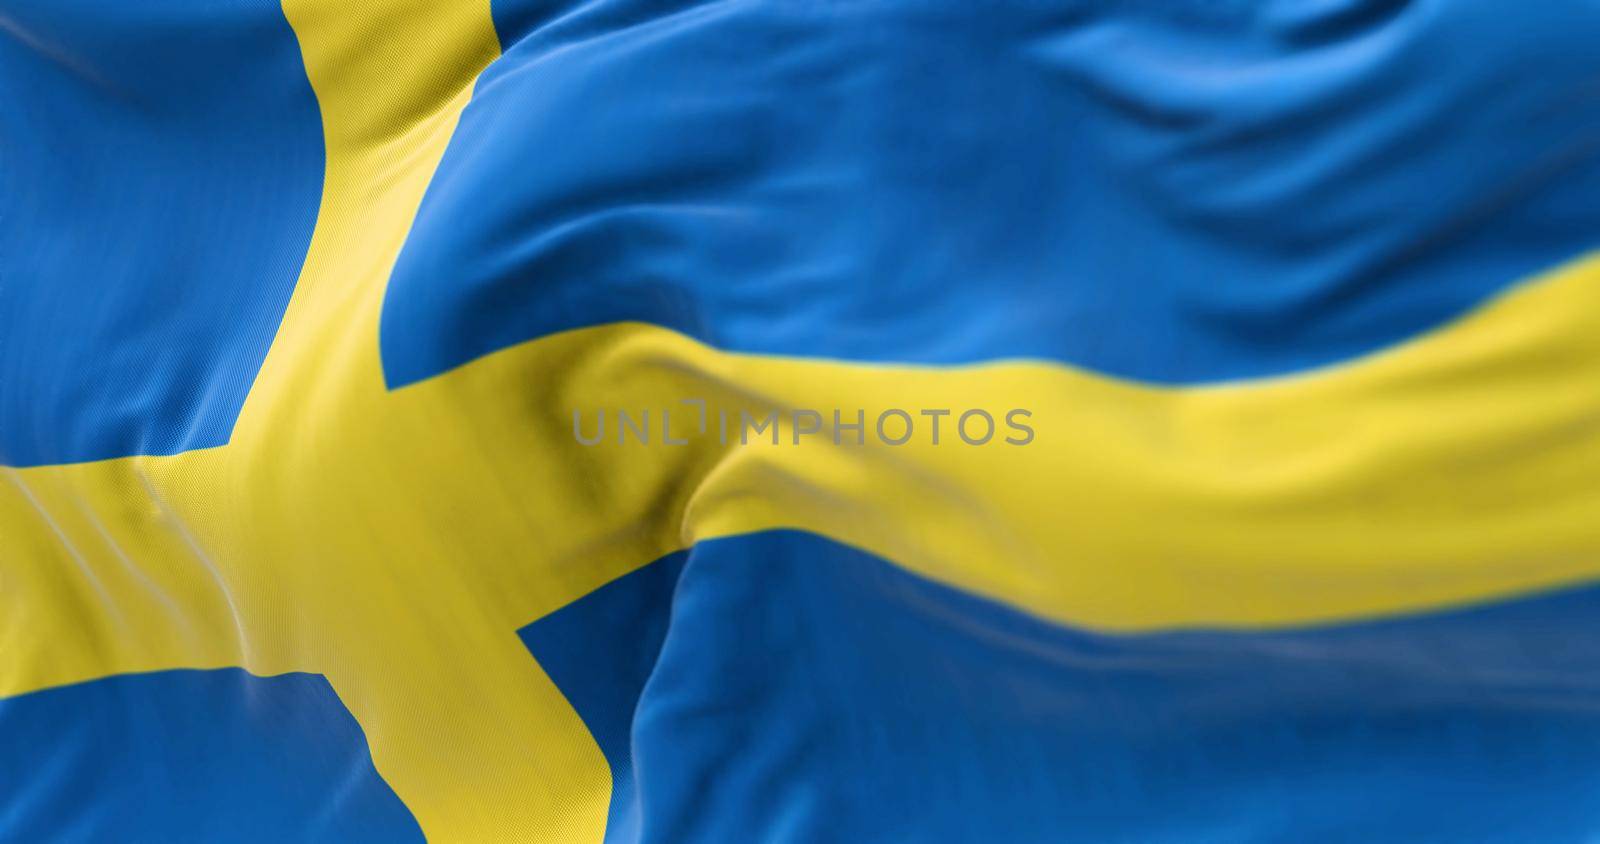 Close-up view of Sweden national flag waving in the wind by rarrarorro